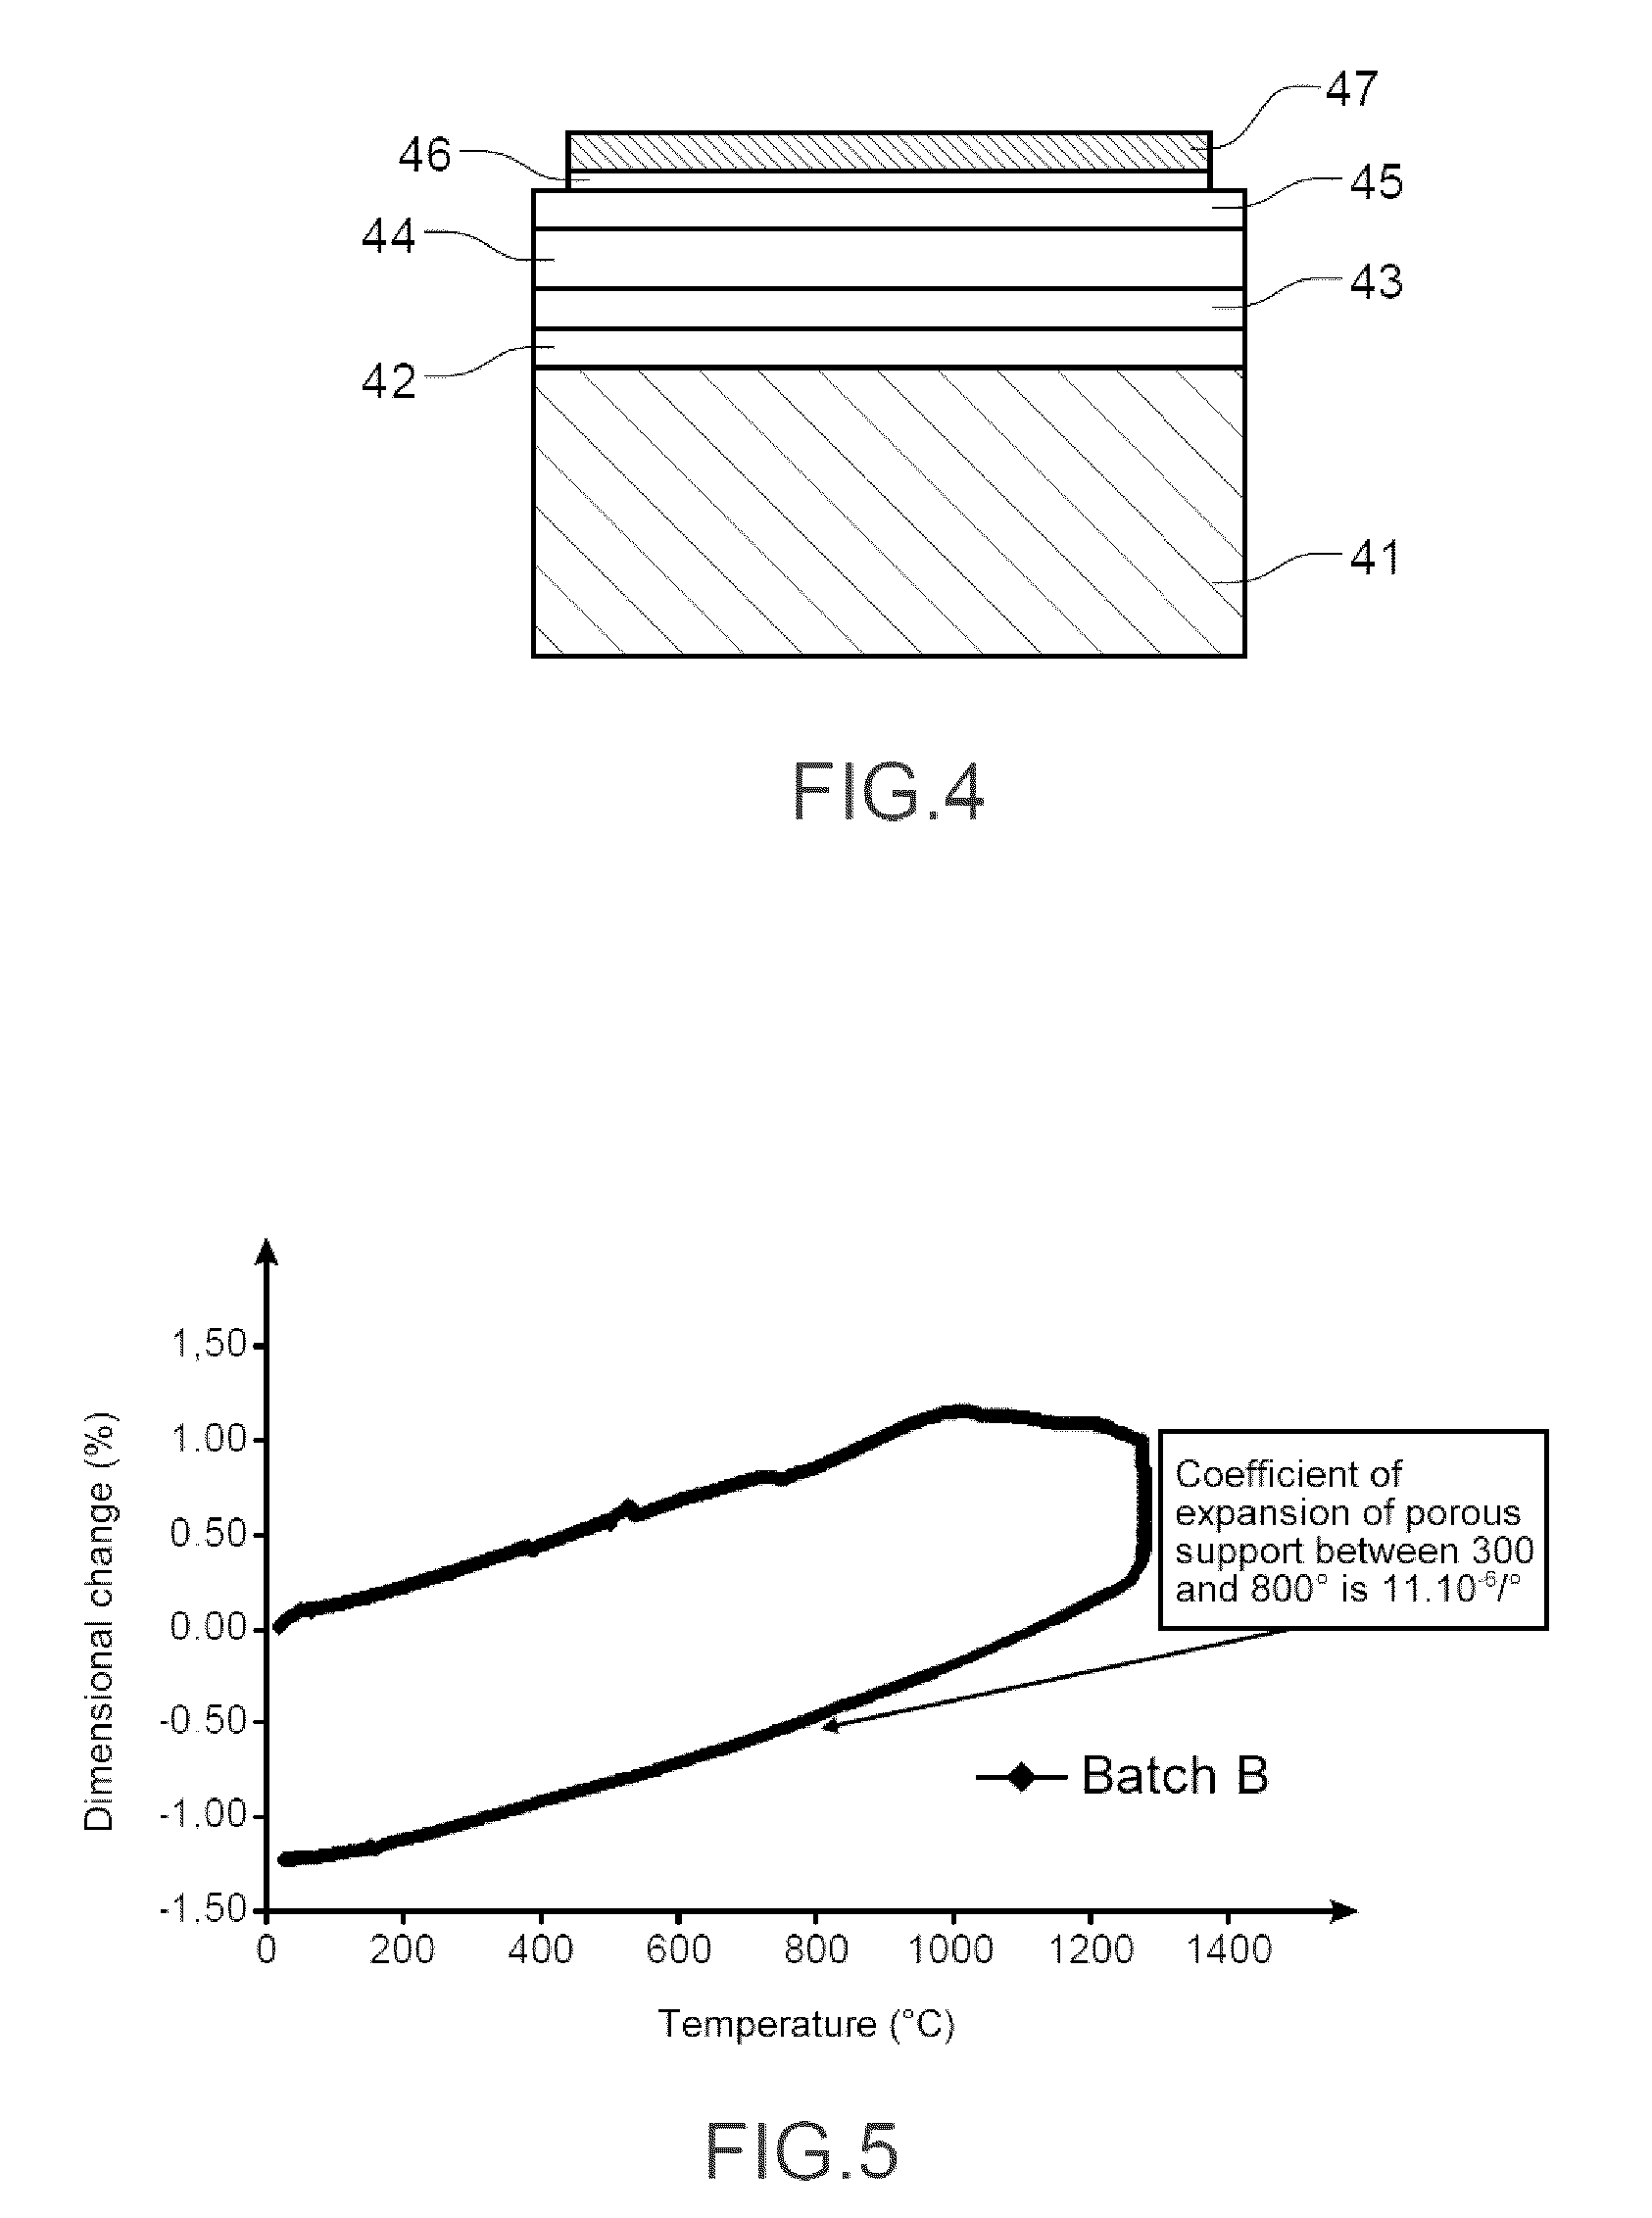 Metal-supported electrochemical cell and method for fabricating same